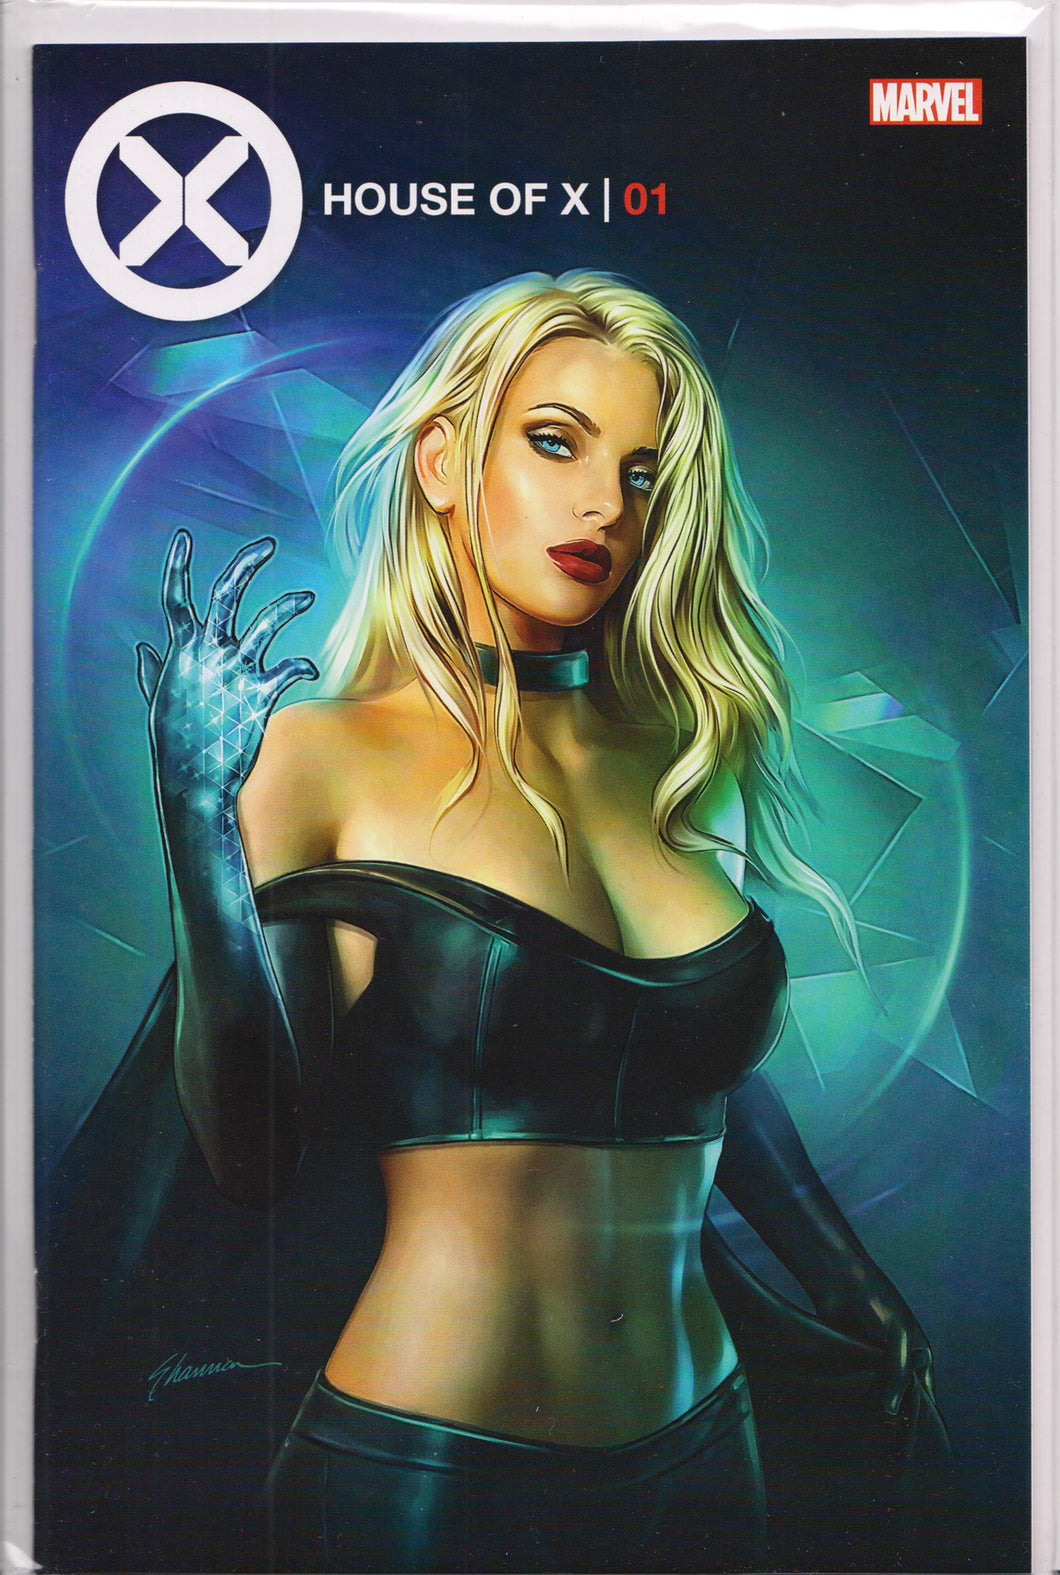 HOUSE OF X #1 (SHANNON MAER EXCLUSIVE VARIANT) COMIC BOOK ~ Marvel Comics